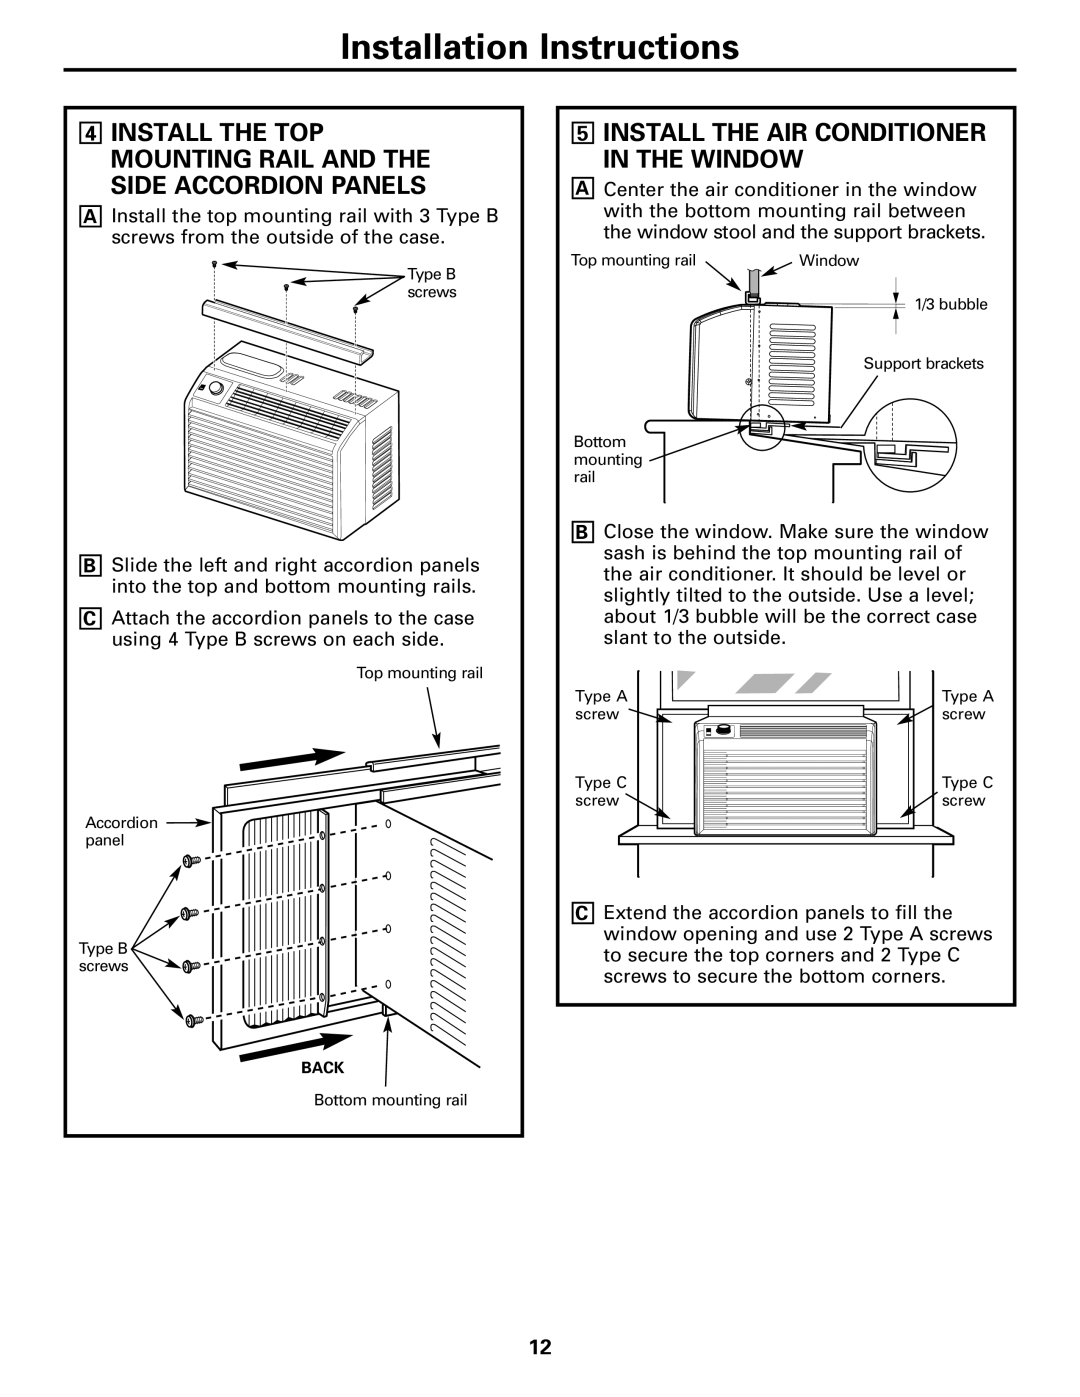 GE AGQ05, AGV05, AGS05, AGN05 owner manual 5INSTALL THE AIR CONDITIONER IN THE WINDOW, Installation Instructions, Back 